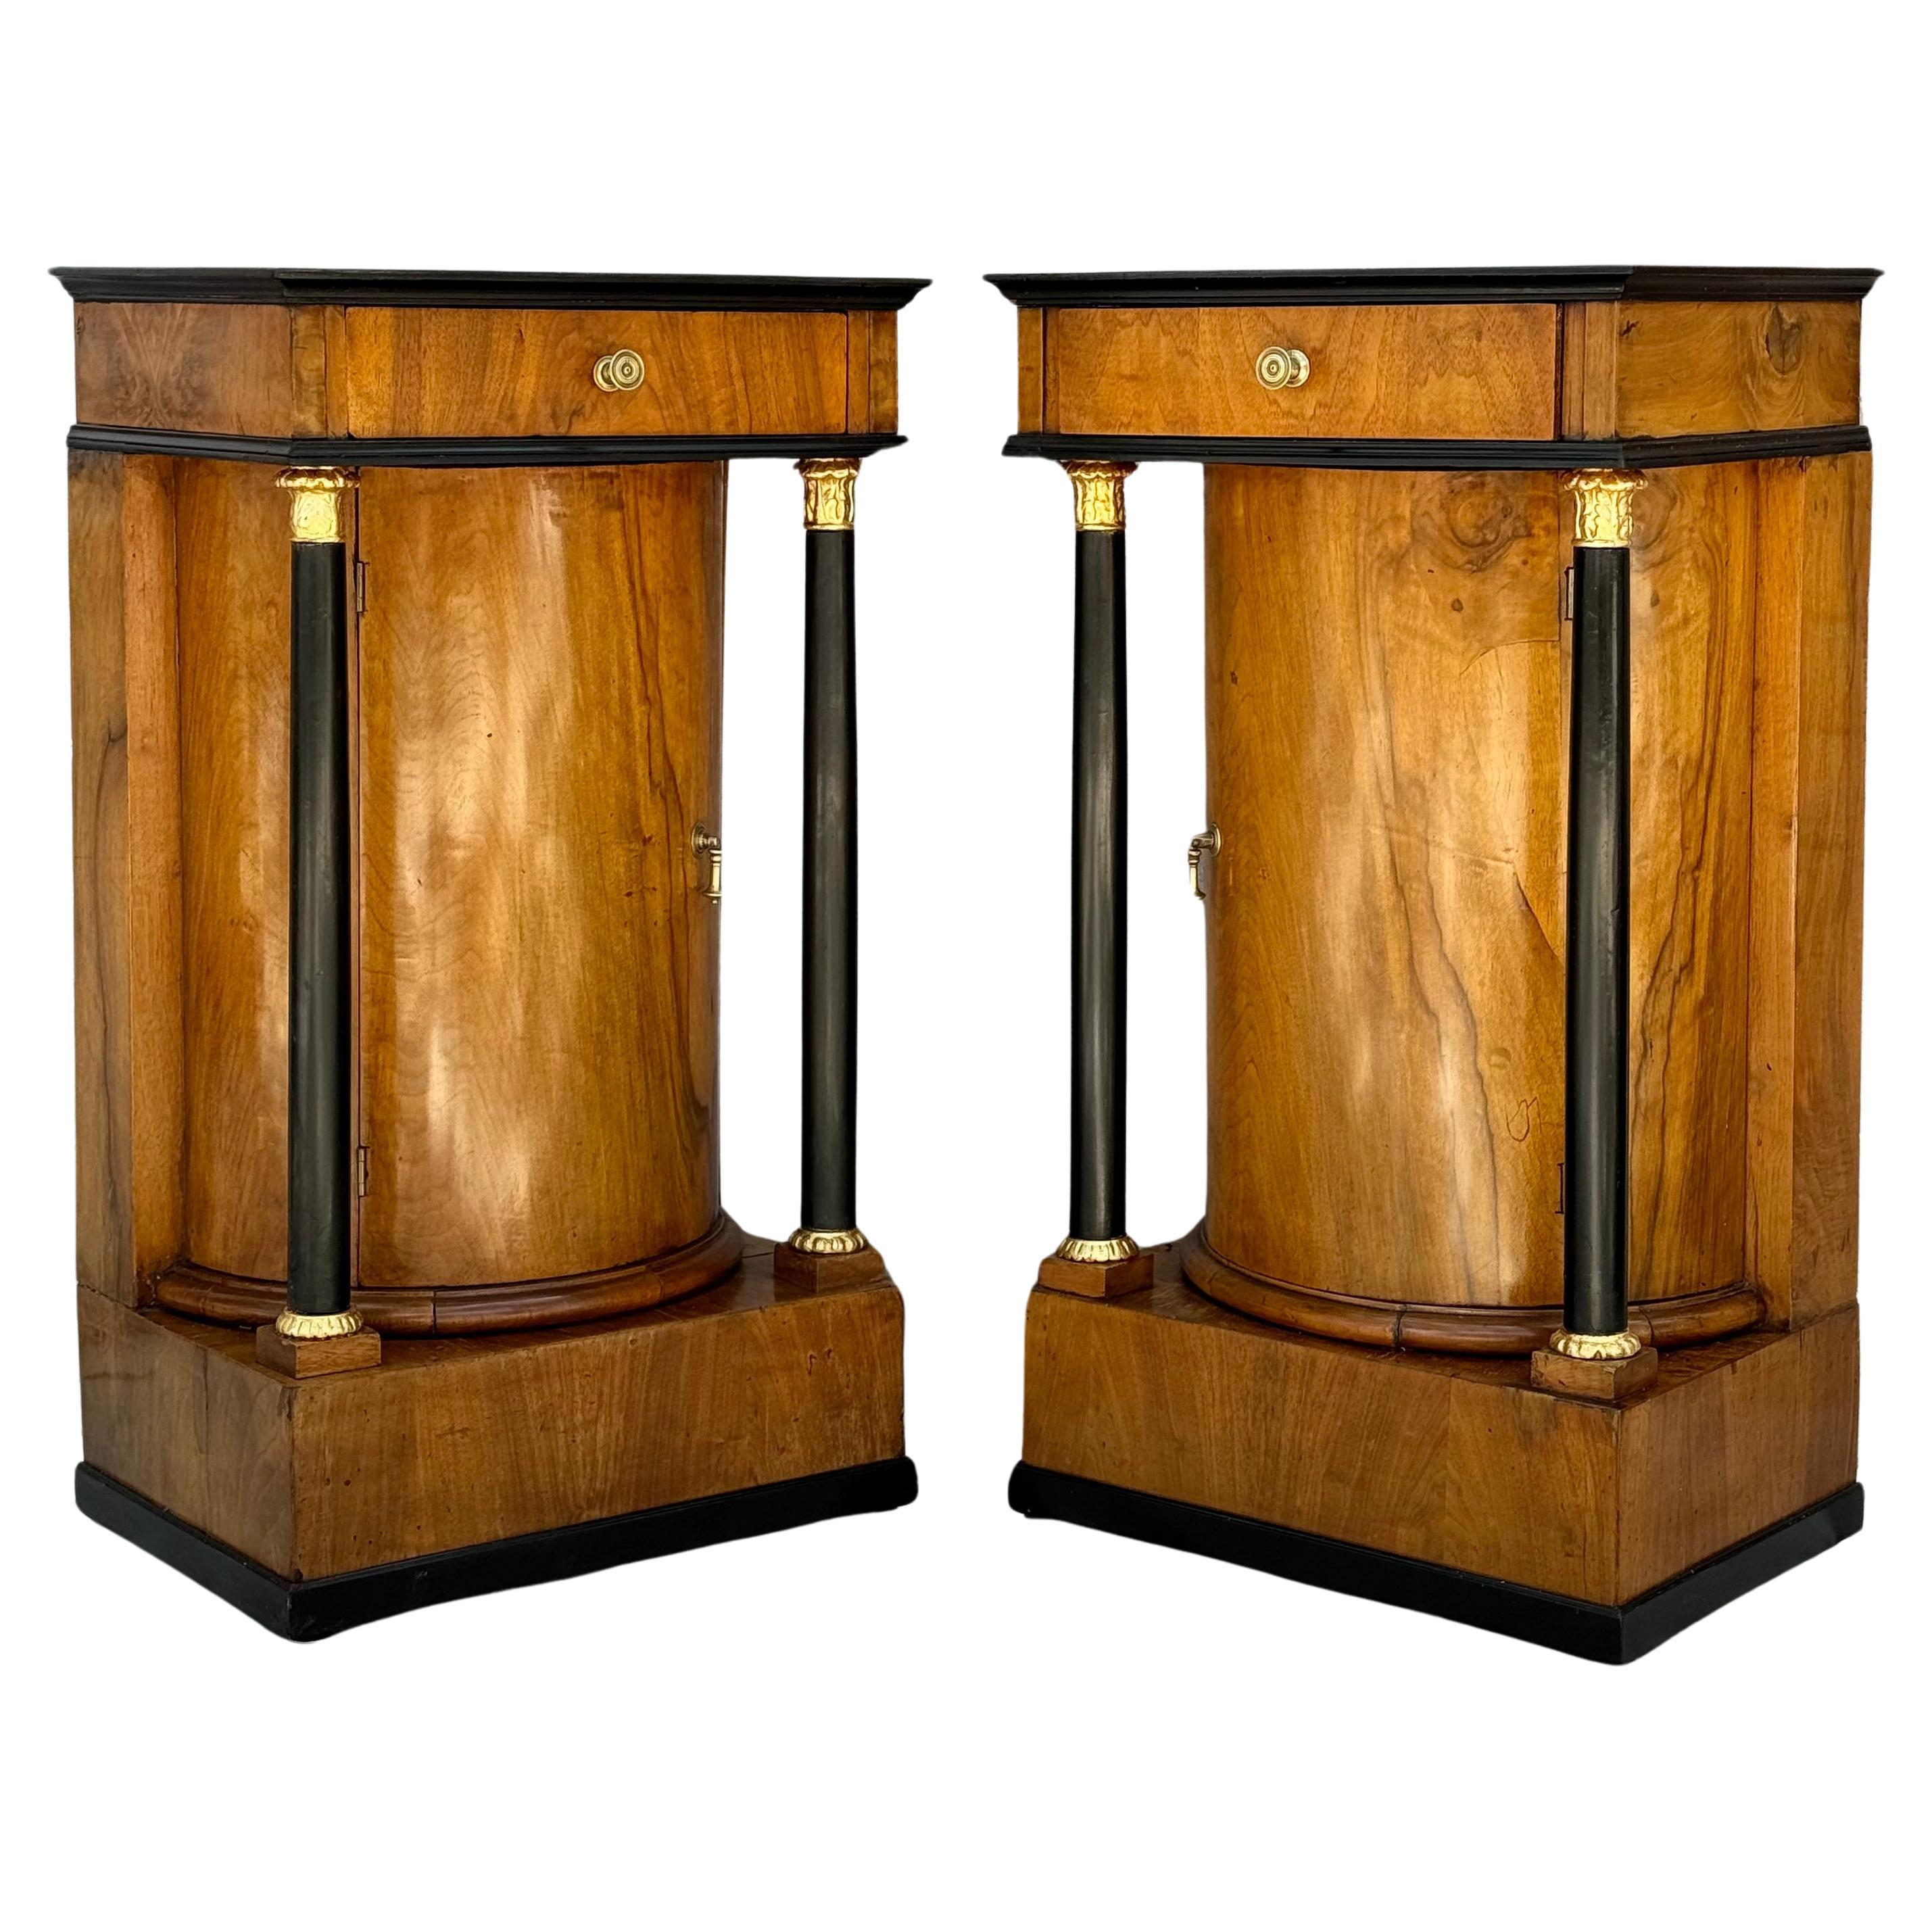 Rare Pair of Early 19th Century Cylinder Side Chests